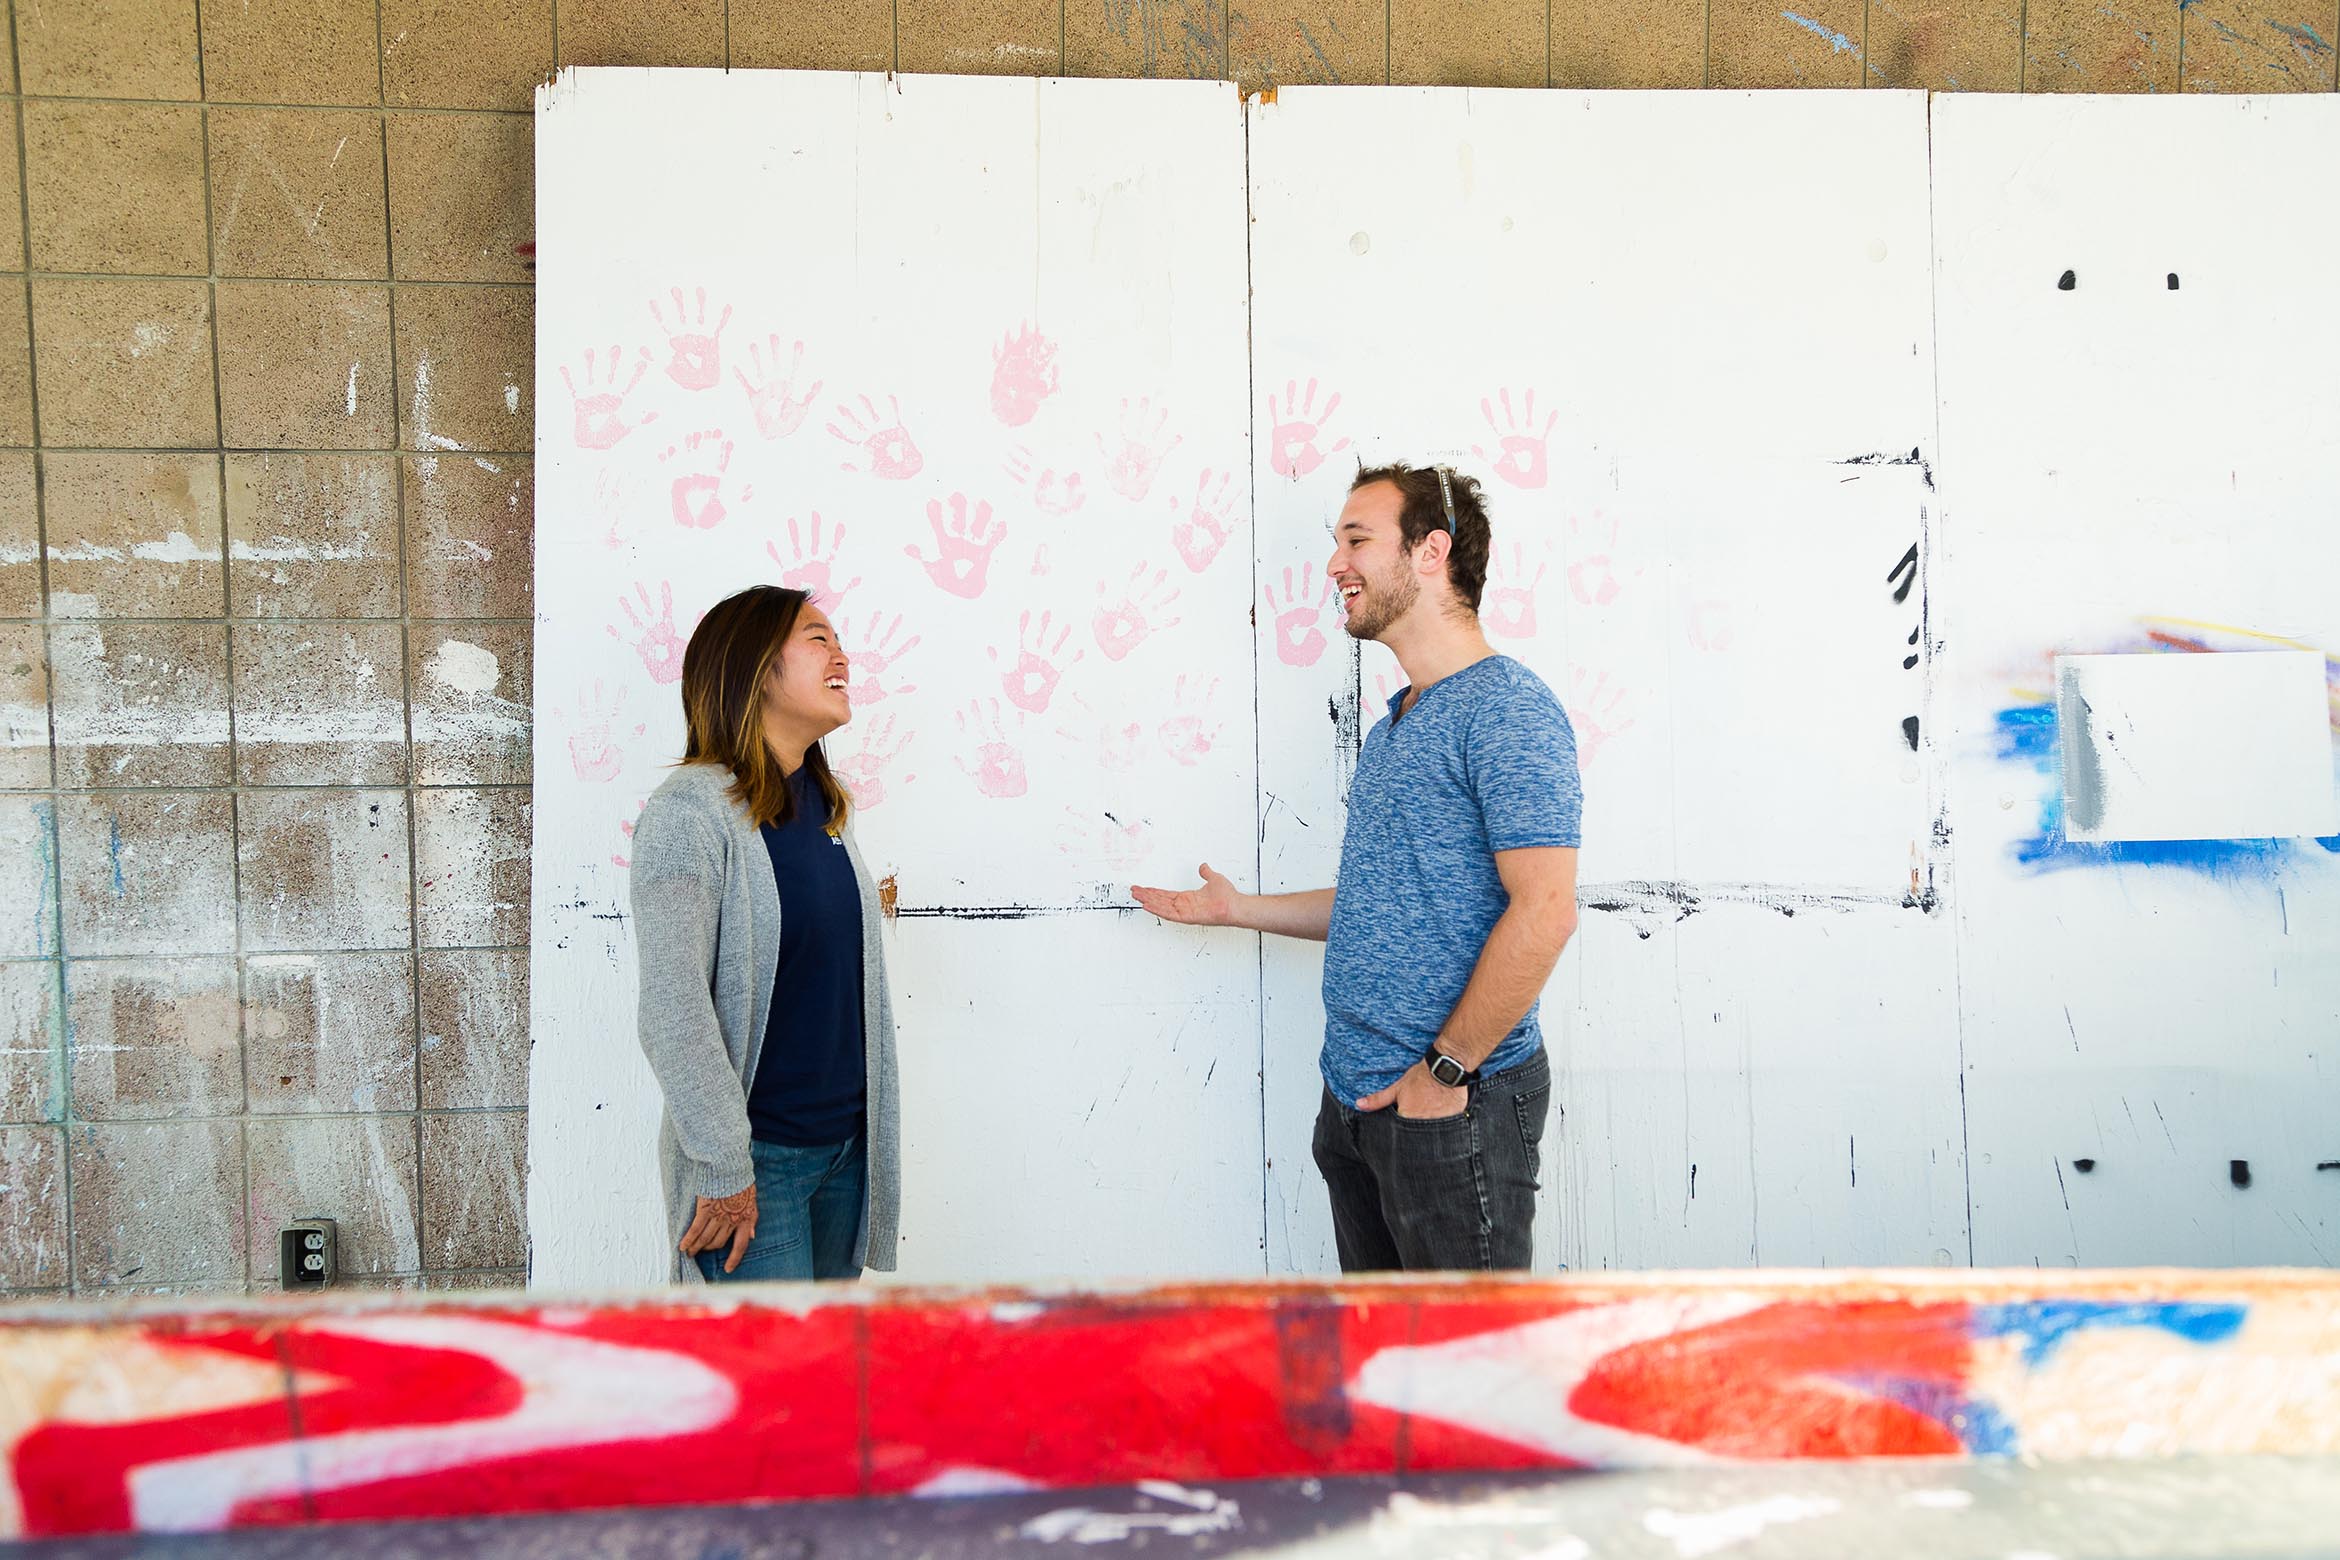 This is an image of two students chatting in front of an art mural.